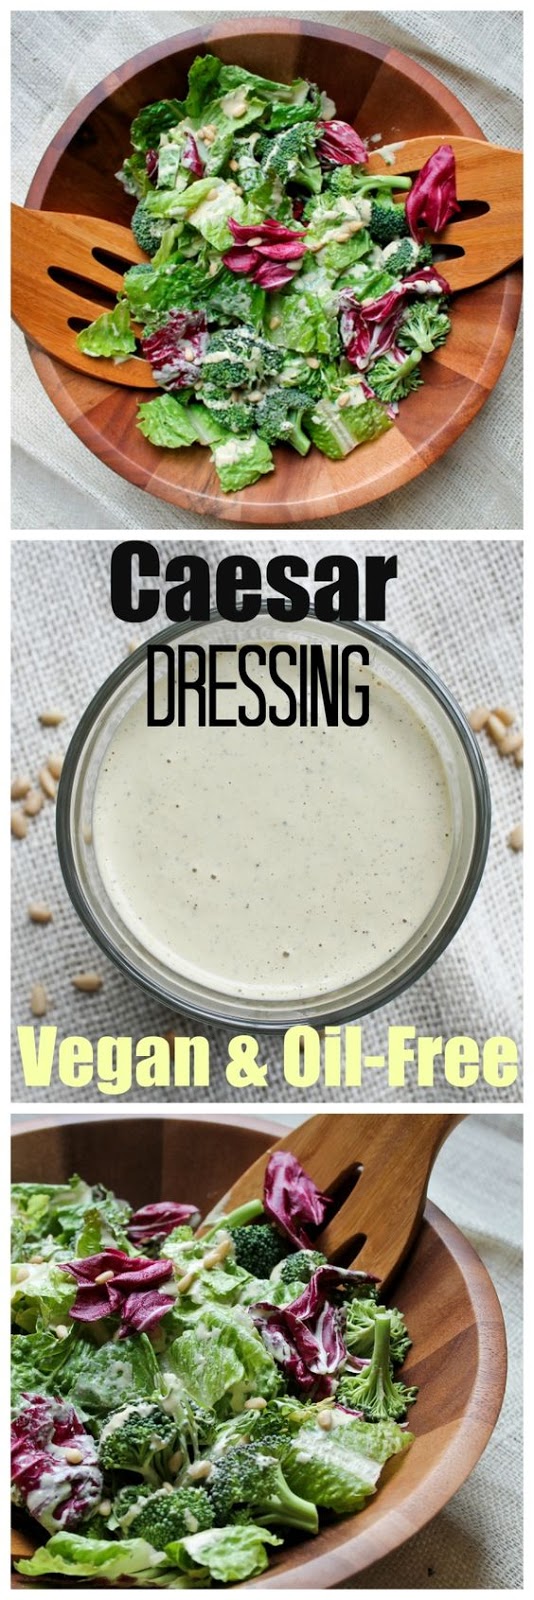 The most amazing Caesar dressing that is vegan and oil-free and a favorite among readers! Takes just 5 minutes to make!